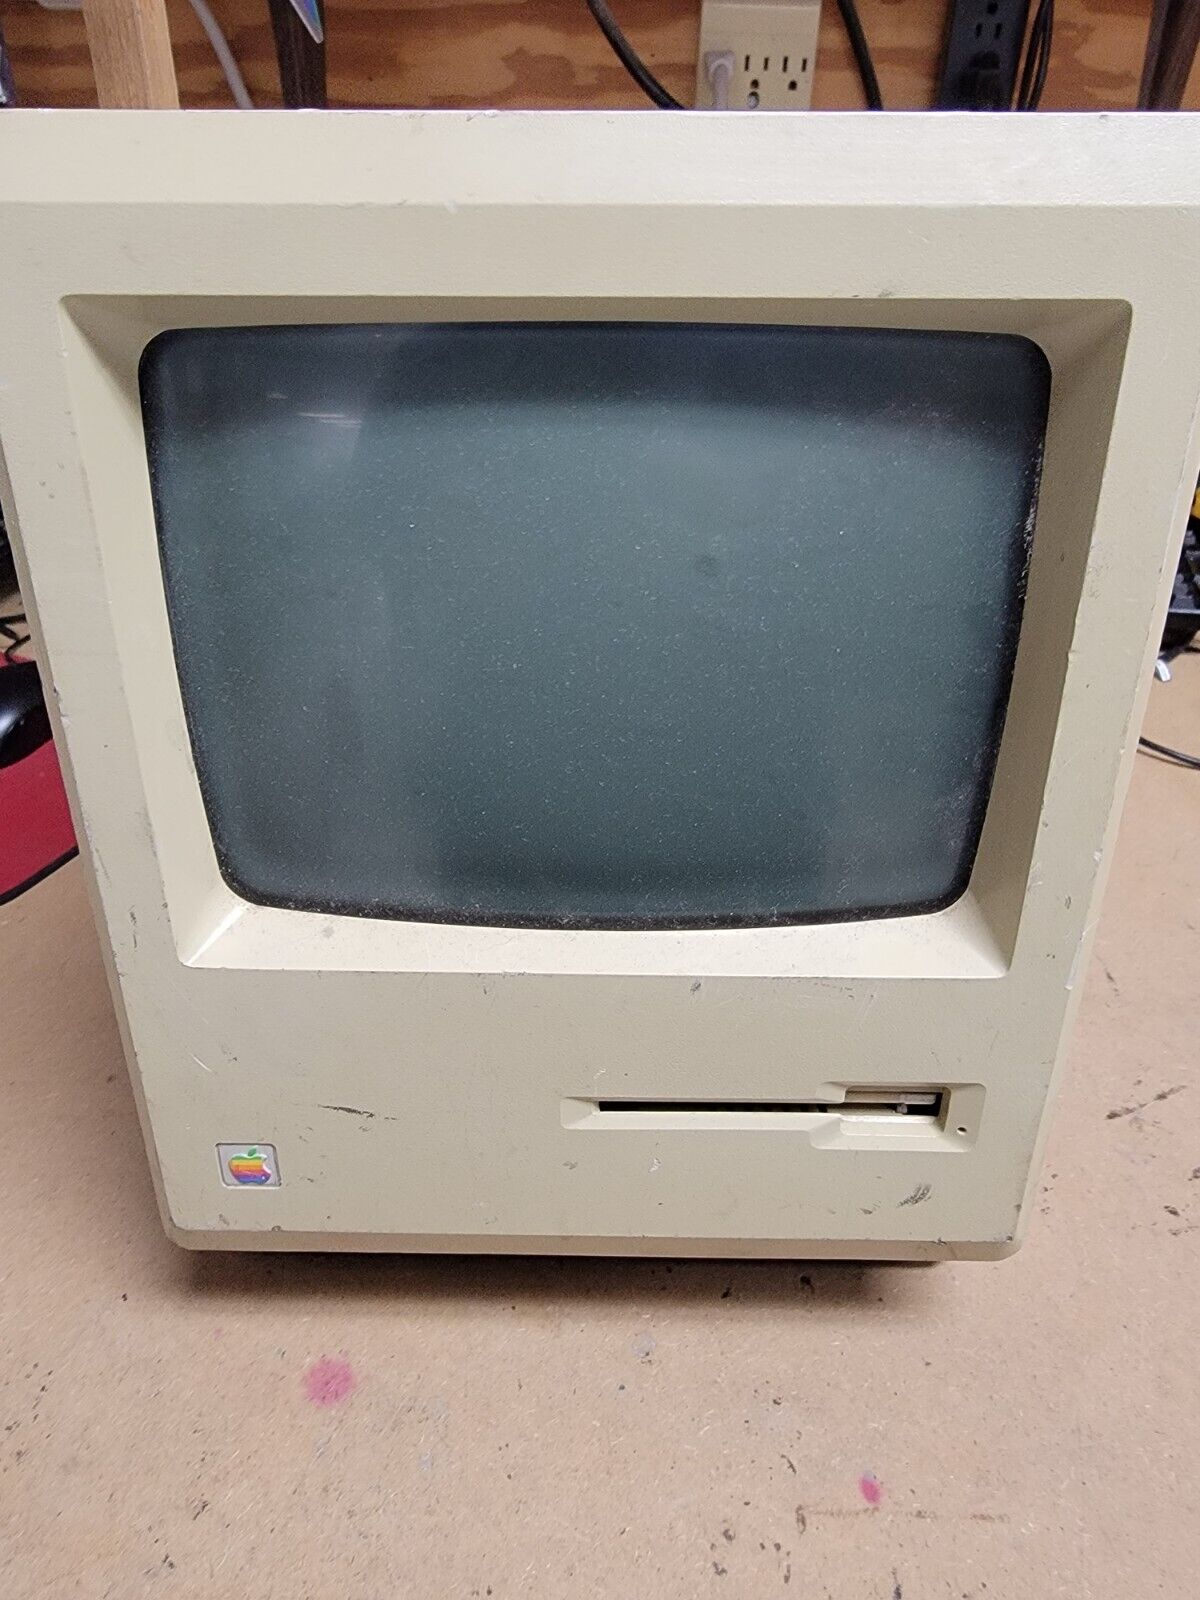 Vintage Apple Macintosh Plus 1MB Model M0001A - Powers on but no video